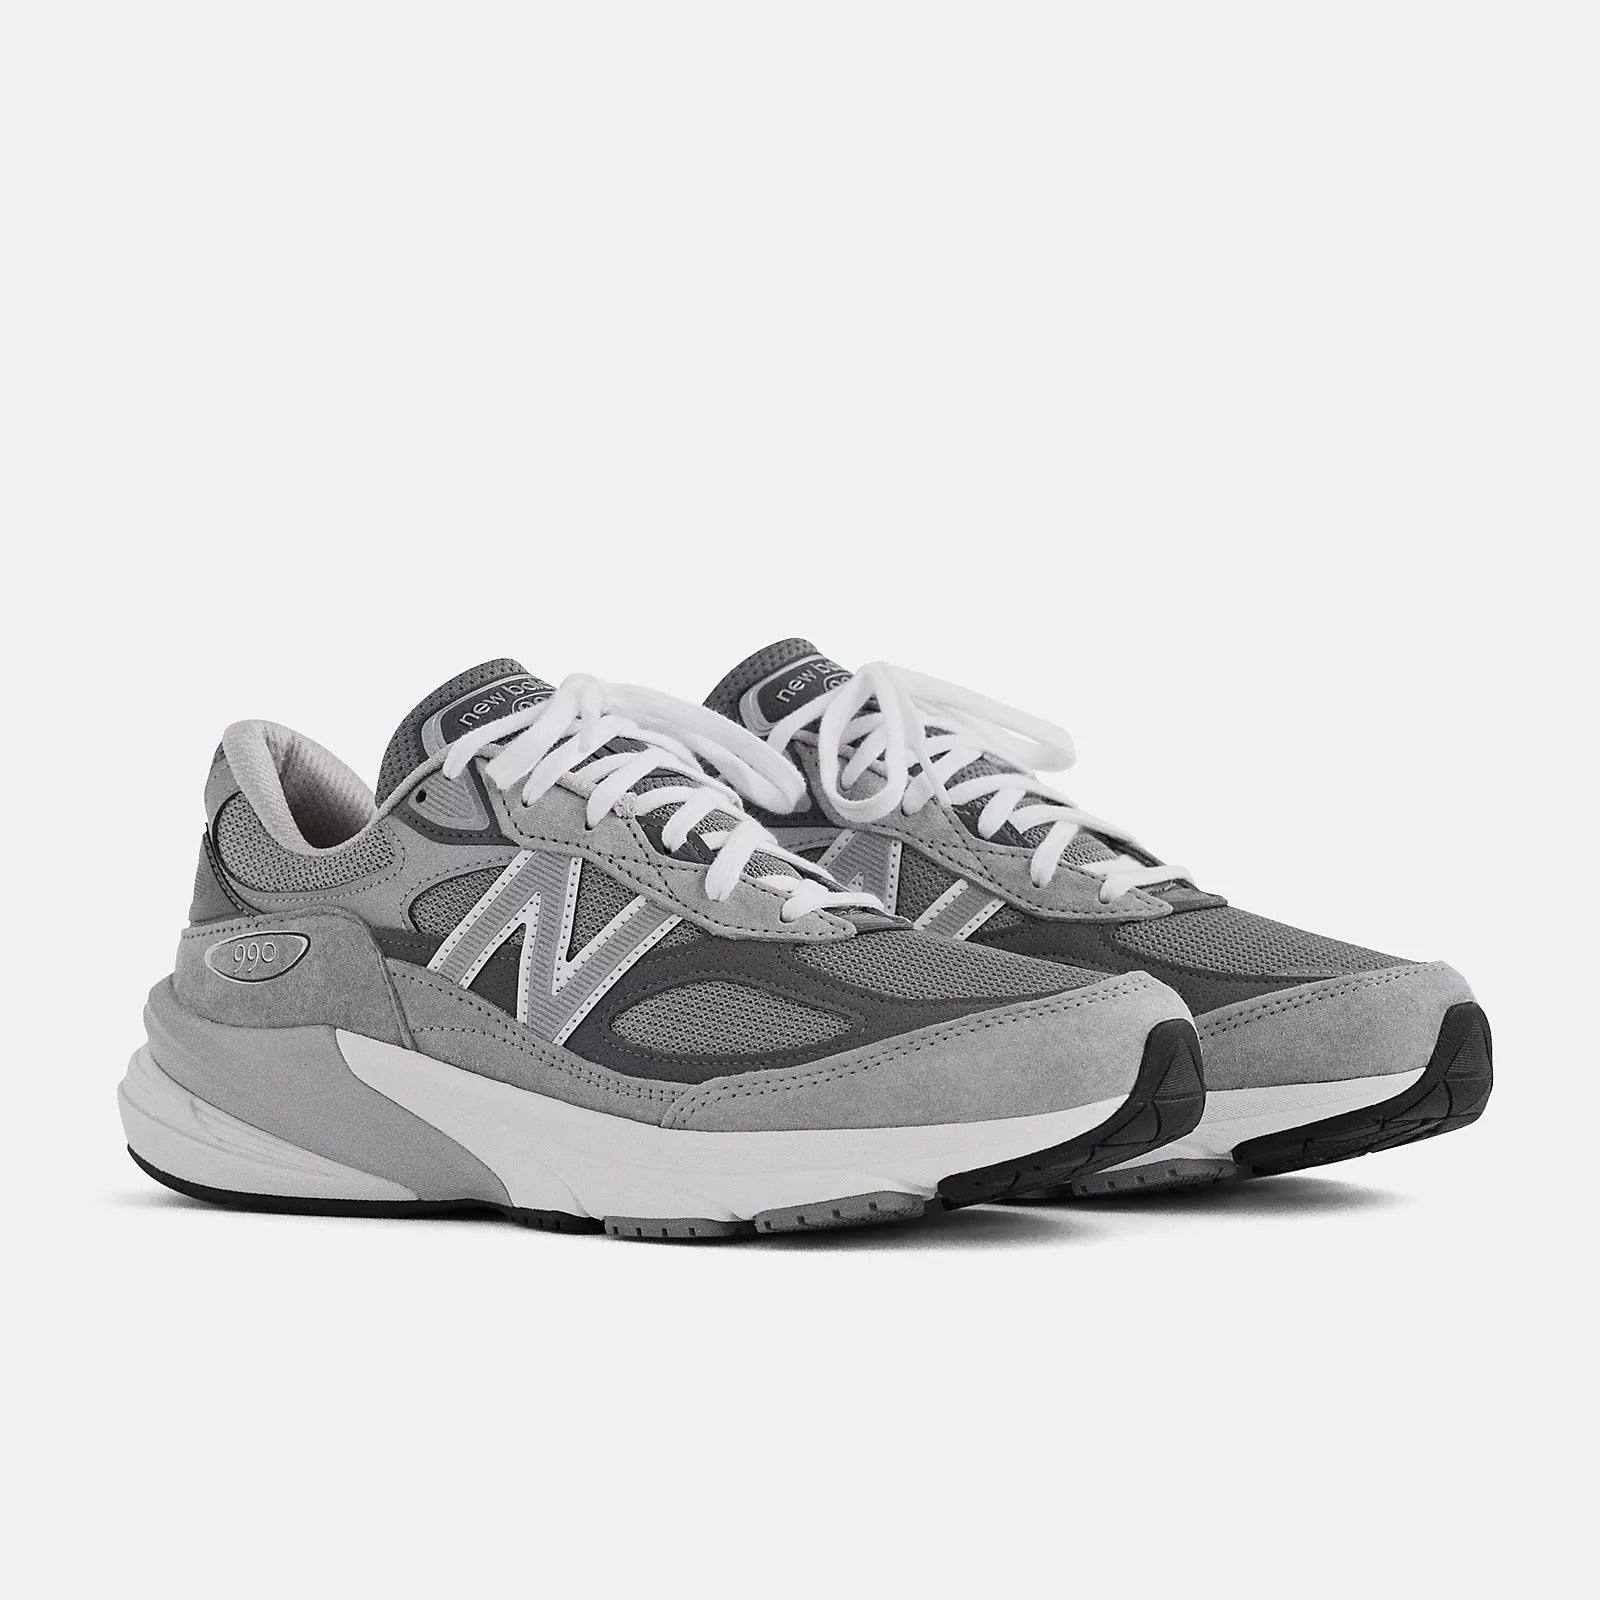 a pair of grey and white New Balance sneakers